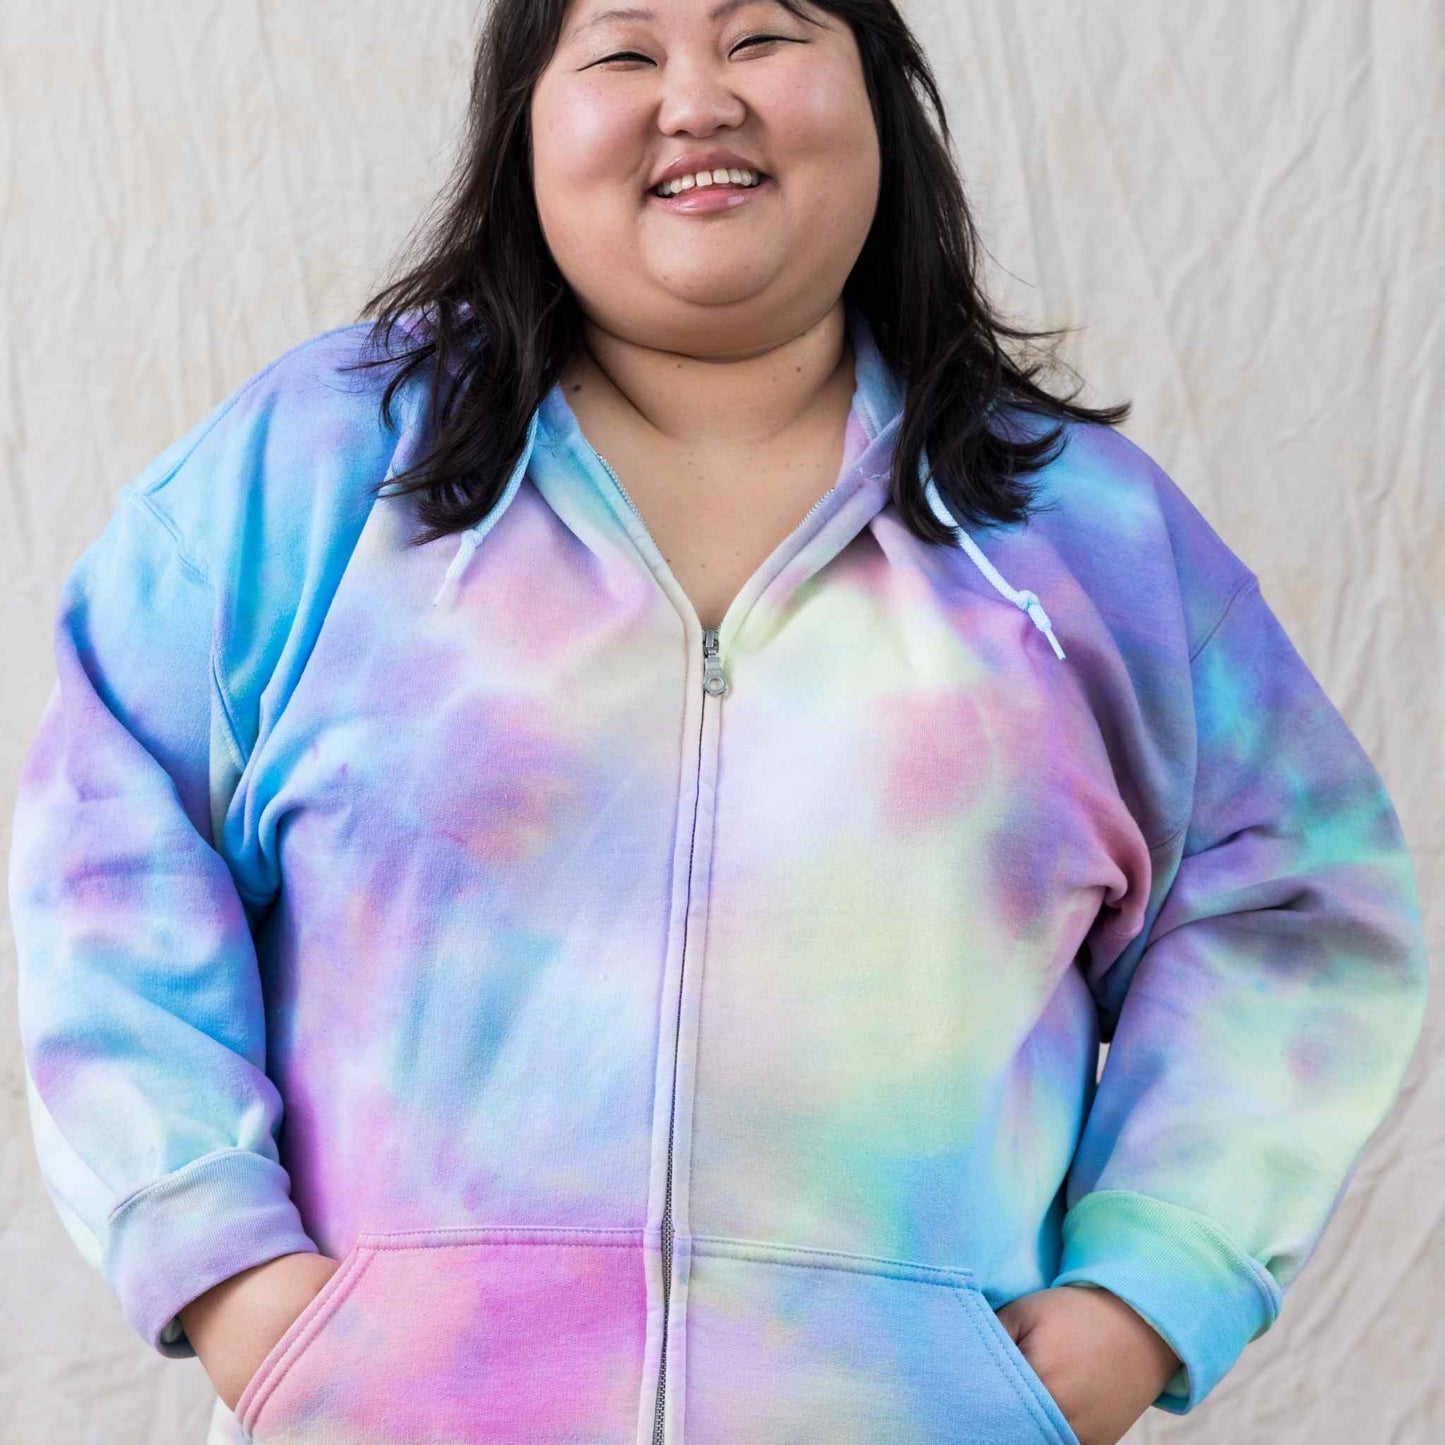 Pastel goth tie dye hoodie watercolor effect blue pink and yellow pattern